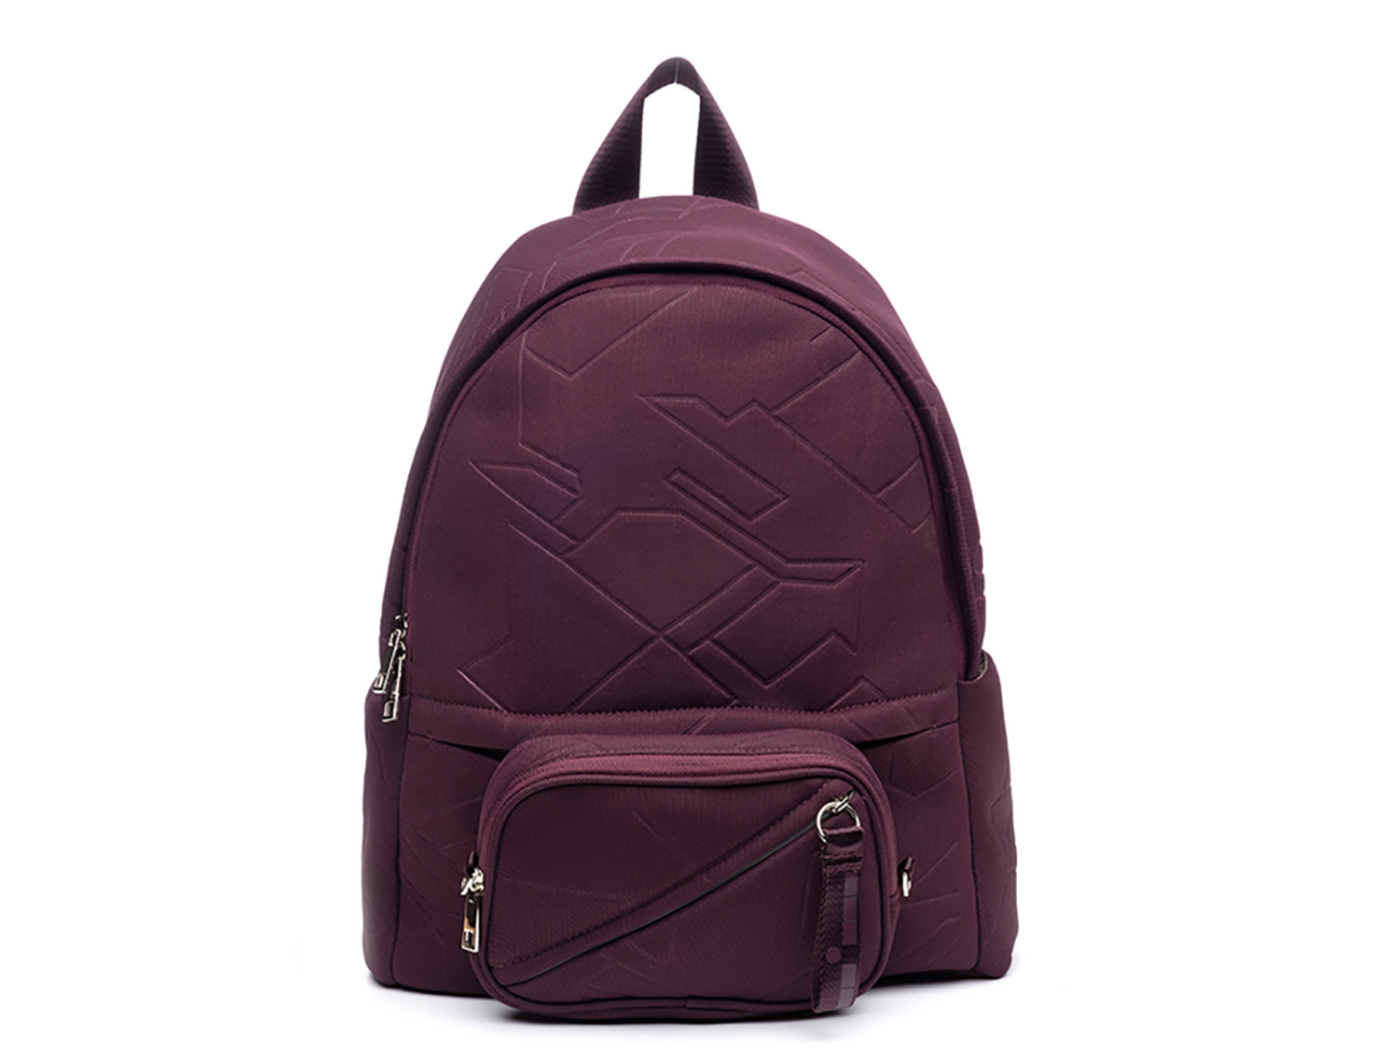 Maya Backpack Bordeaux front view with snap on pouch 